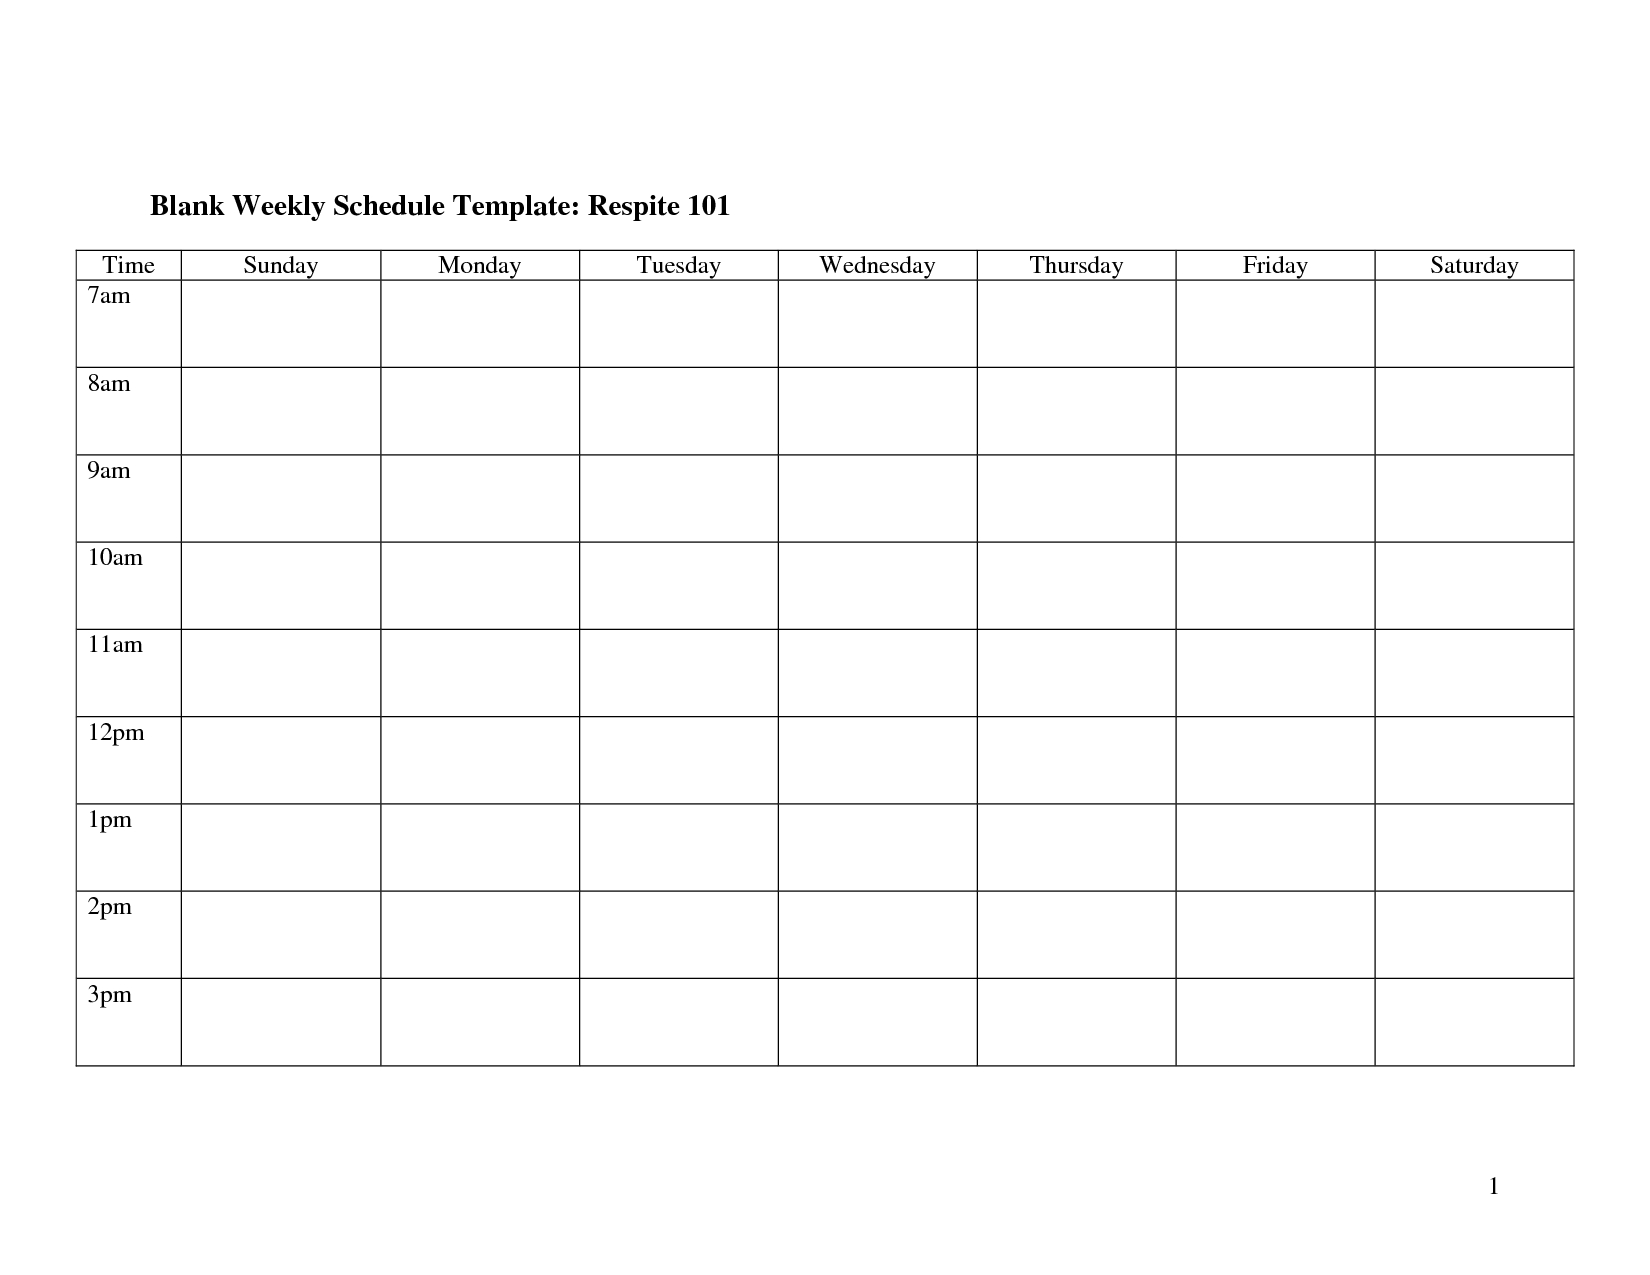 15 Blank Schedule Template Images – Blank Weekly Work Throughout Blank Revision Timetable Template